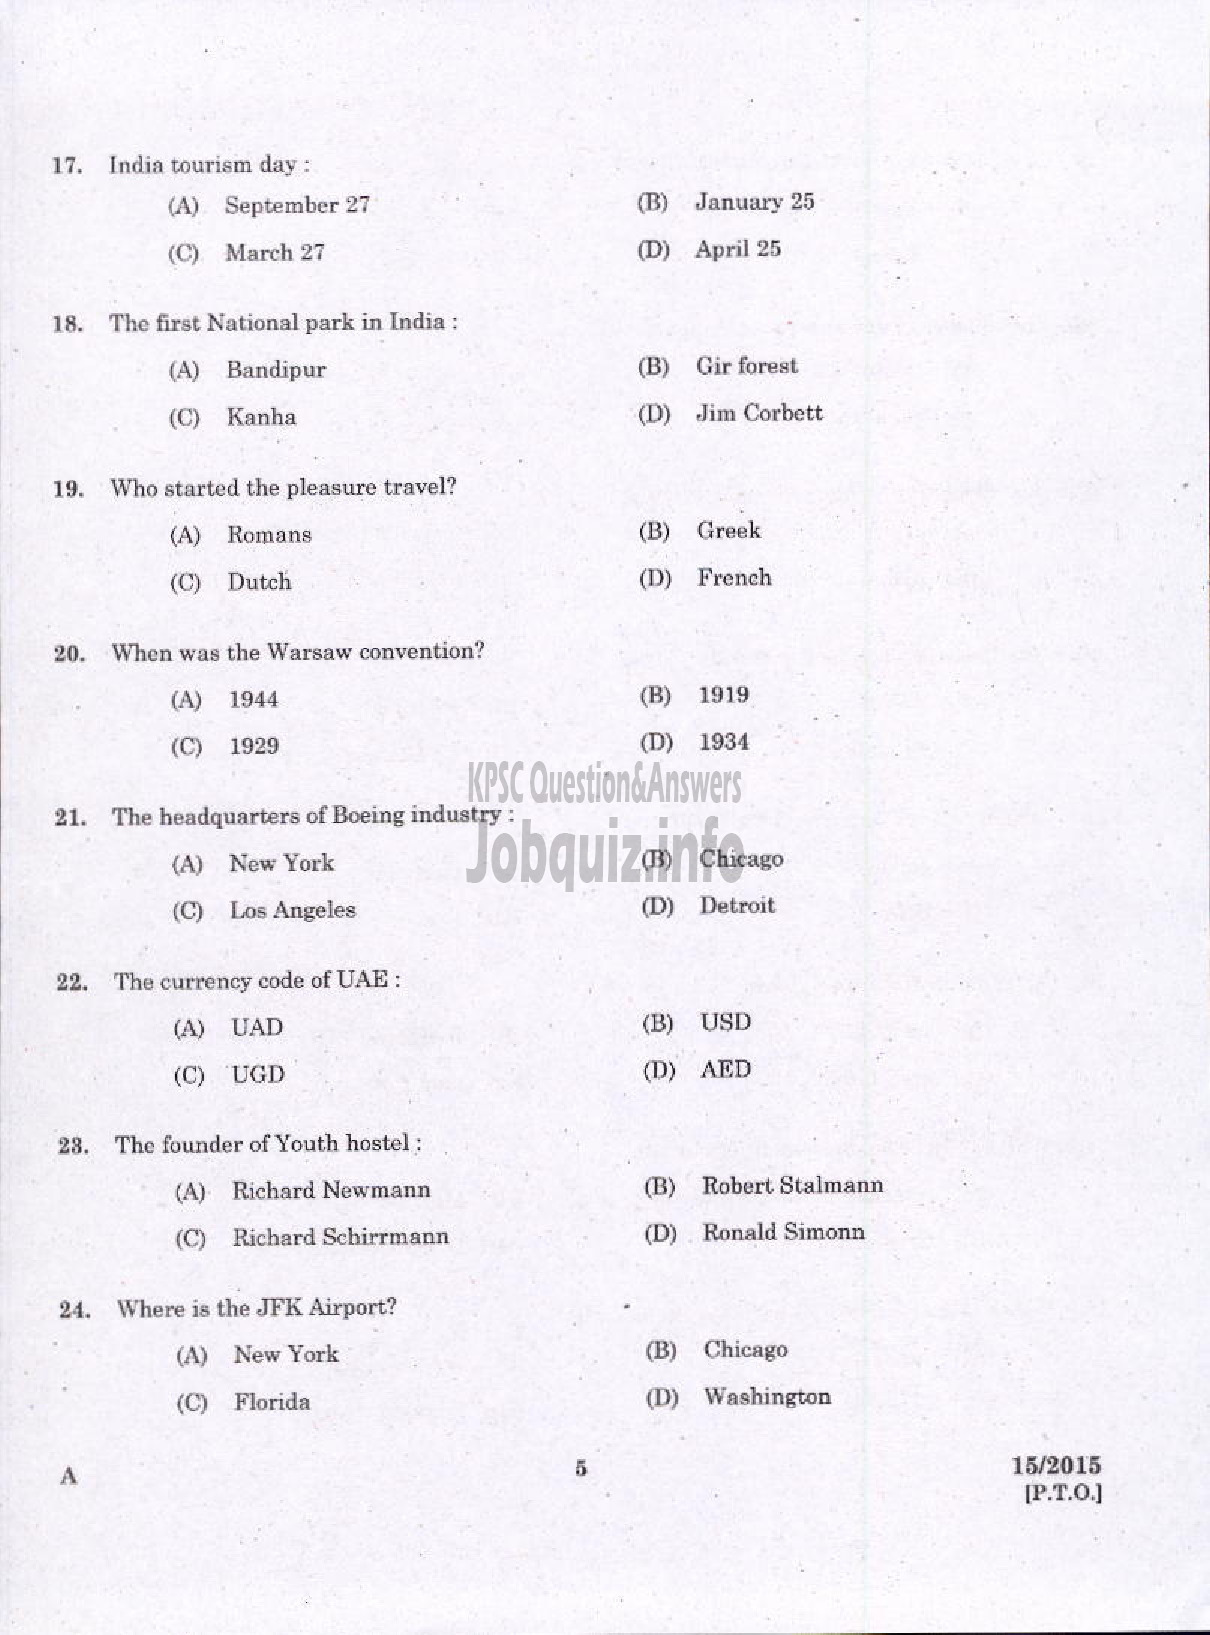 Kerala PSC Question Paper - LABORATORY TECHNICAL ASSISTANT TRAVEL AND TOURISM VHSE-3